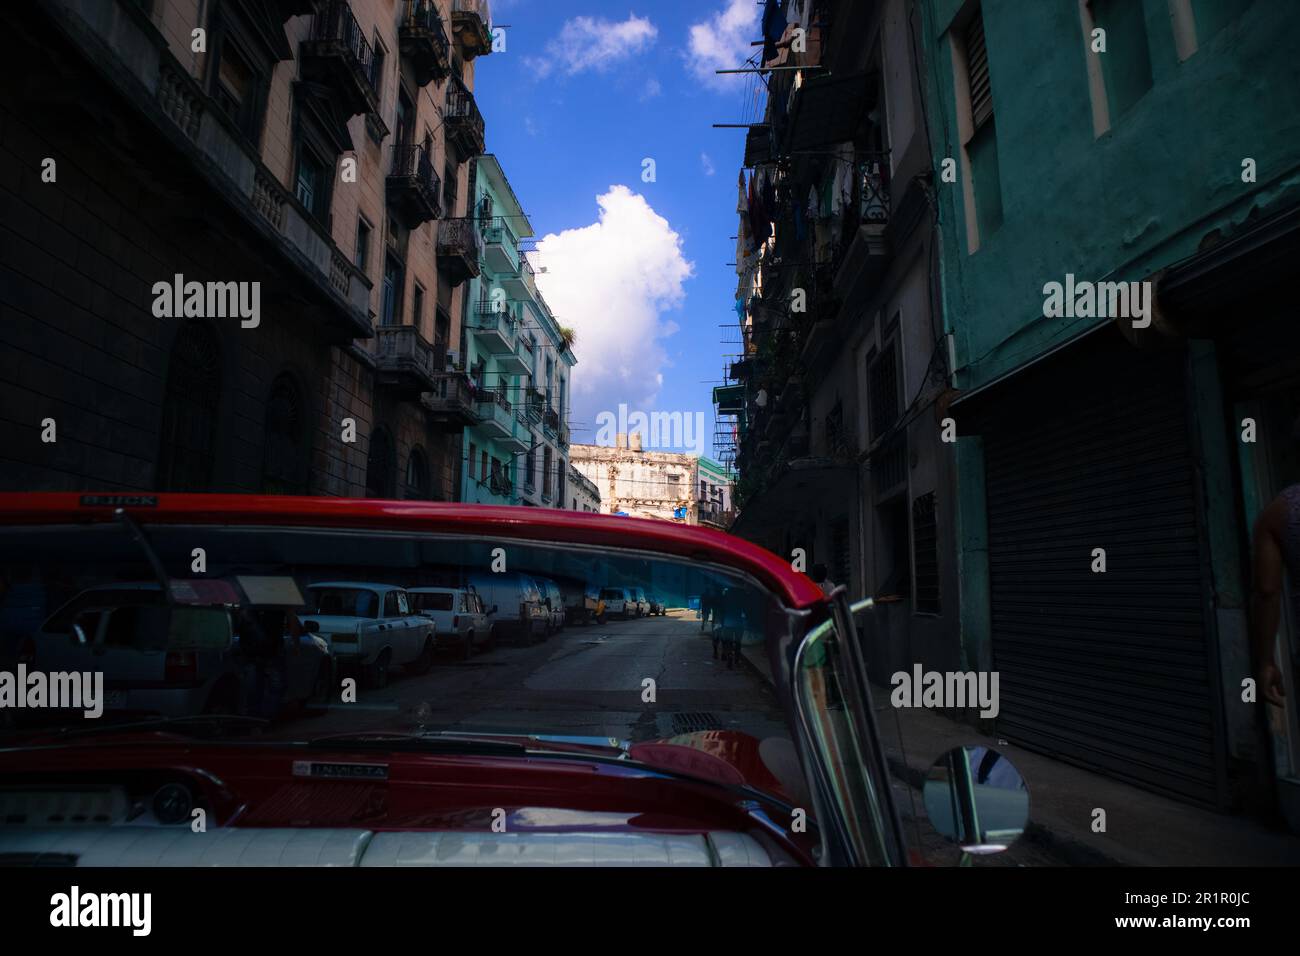 Drive a classic car through Havana for an unforgettable journey into the city's charm and history. Stock Photo